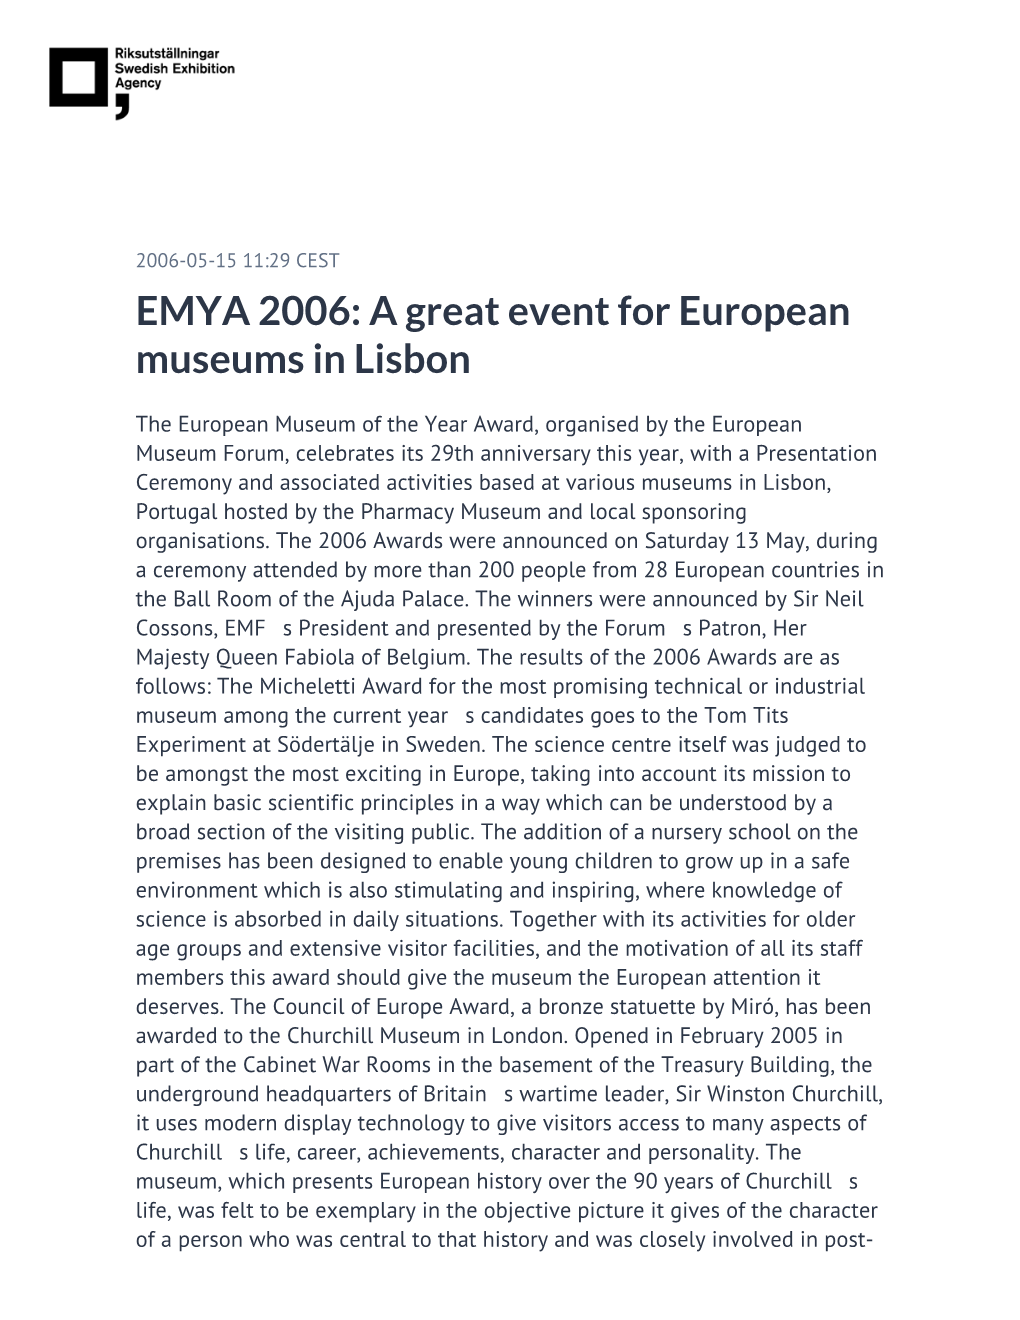 EMYA 2006: a Great Event for European Museums in Lisbon